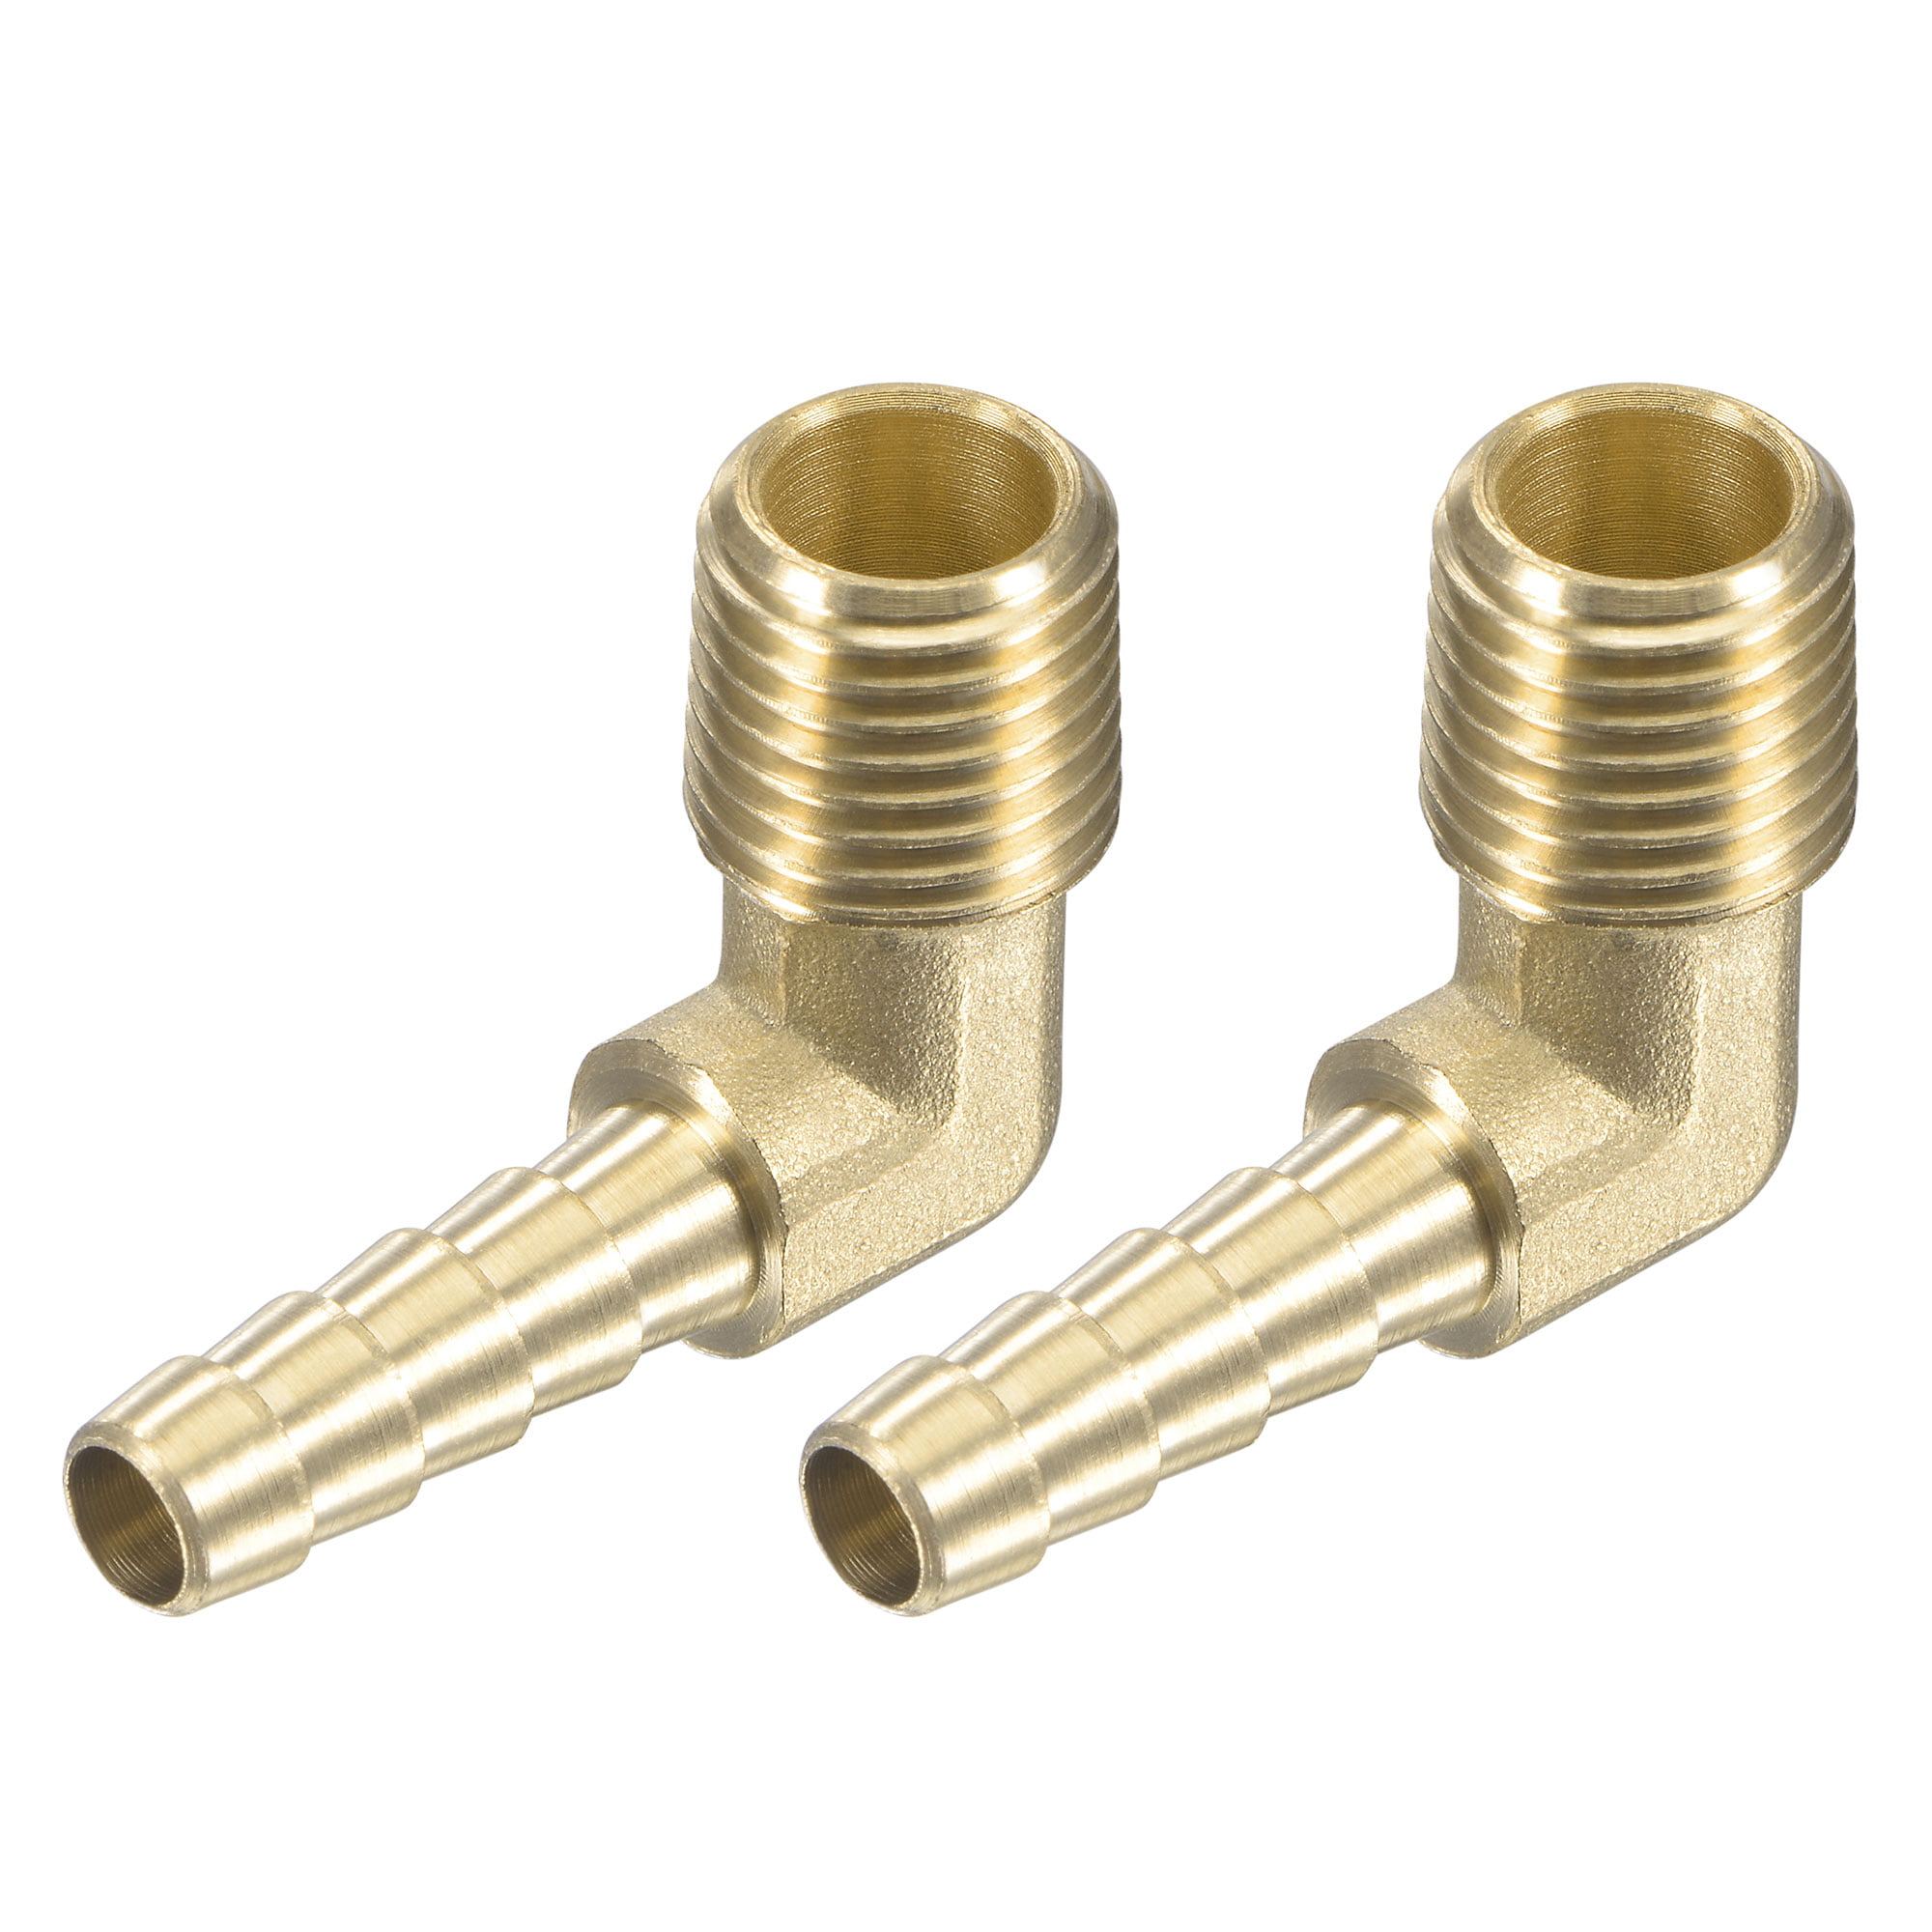 Brass Barb Hose Fitting 90 Degree Elbow 6mm Barbed x 1/4 PT Male Thread 